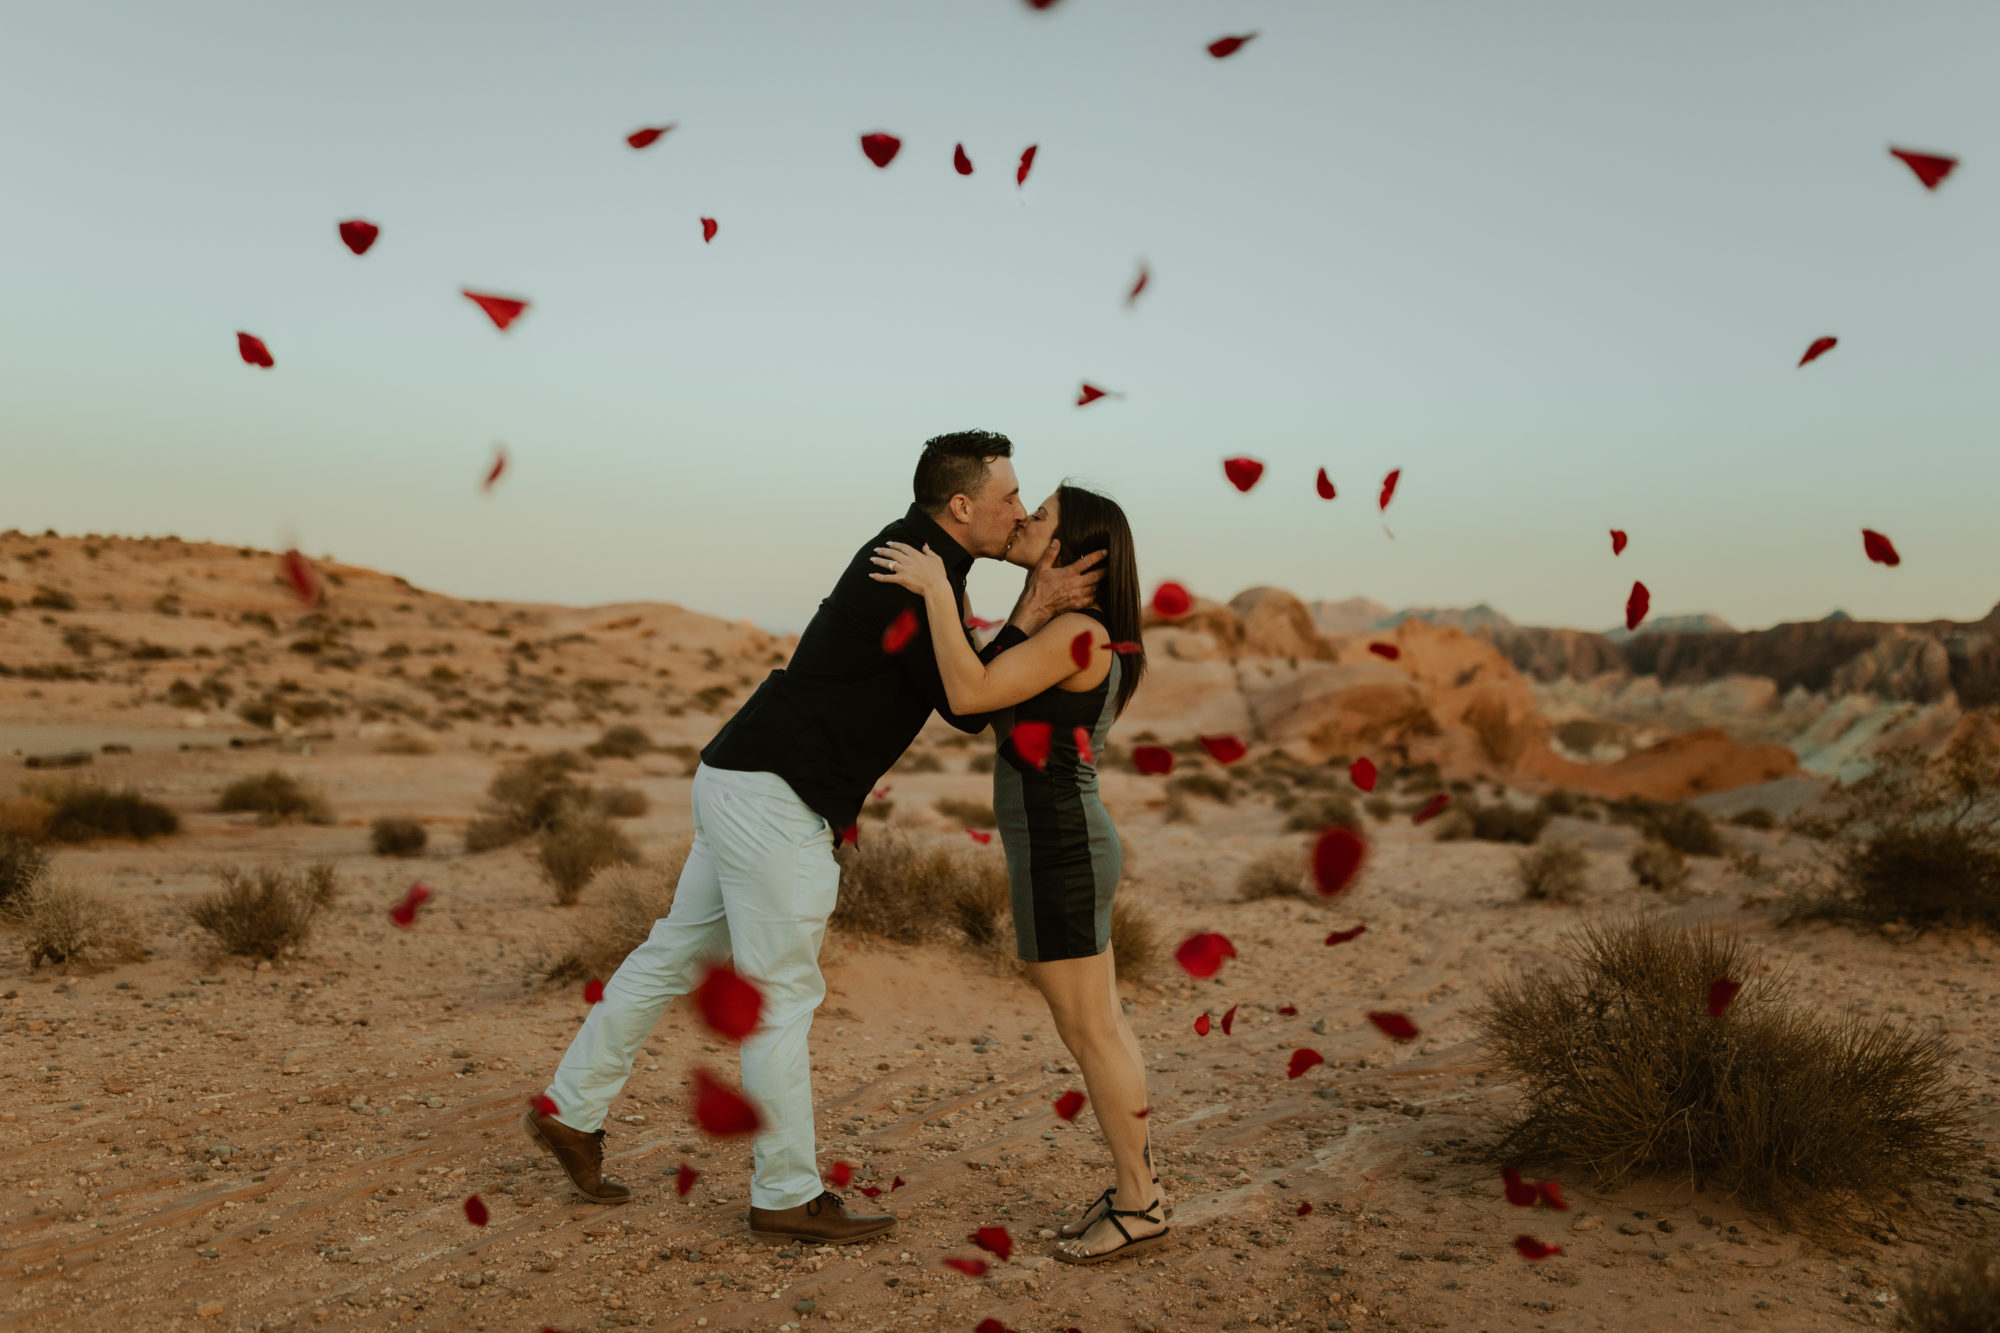 newly engaged couple kissing while rose petals are being thrown at them in the desert after he just proposed to his girlfriend